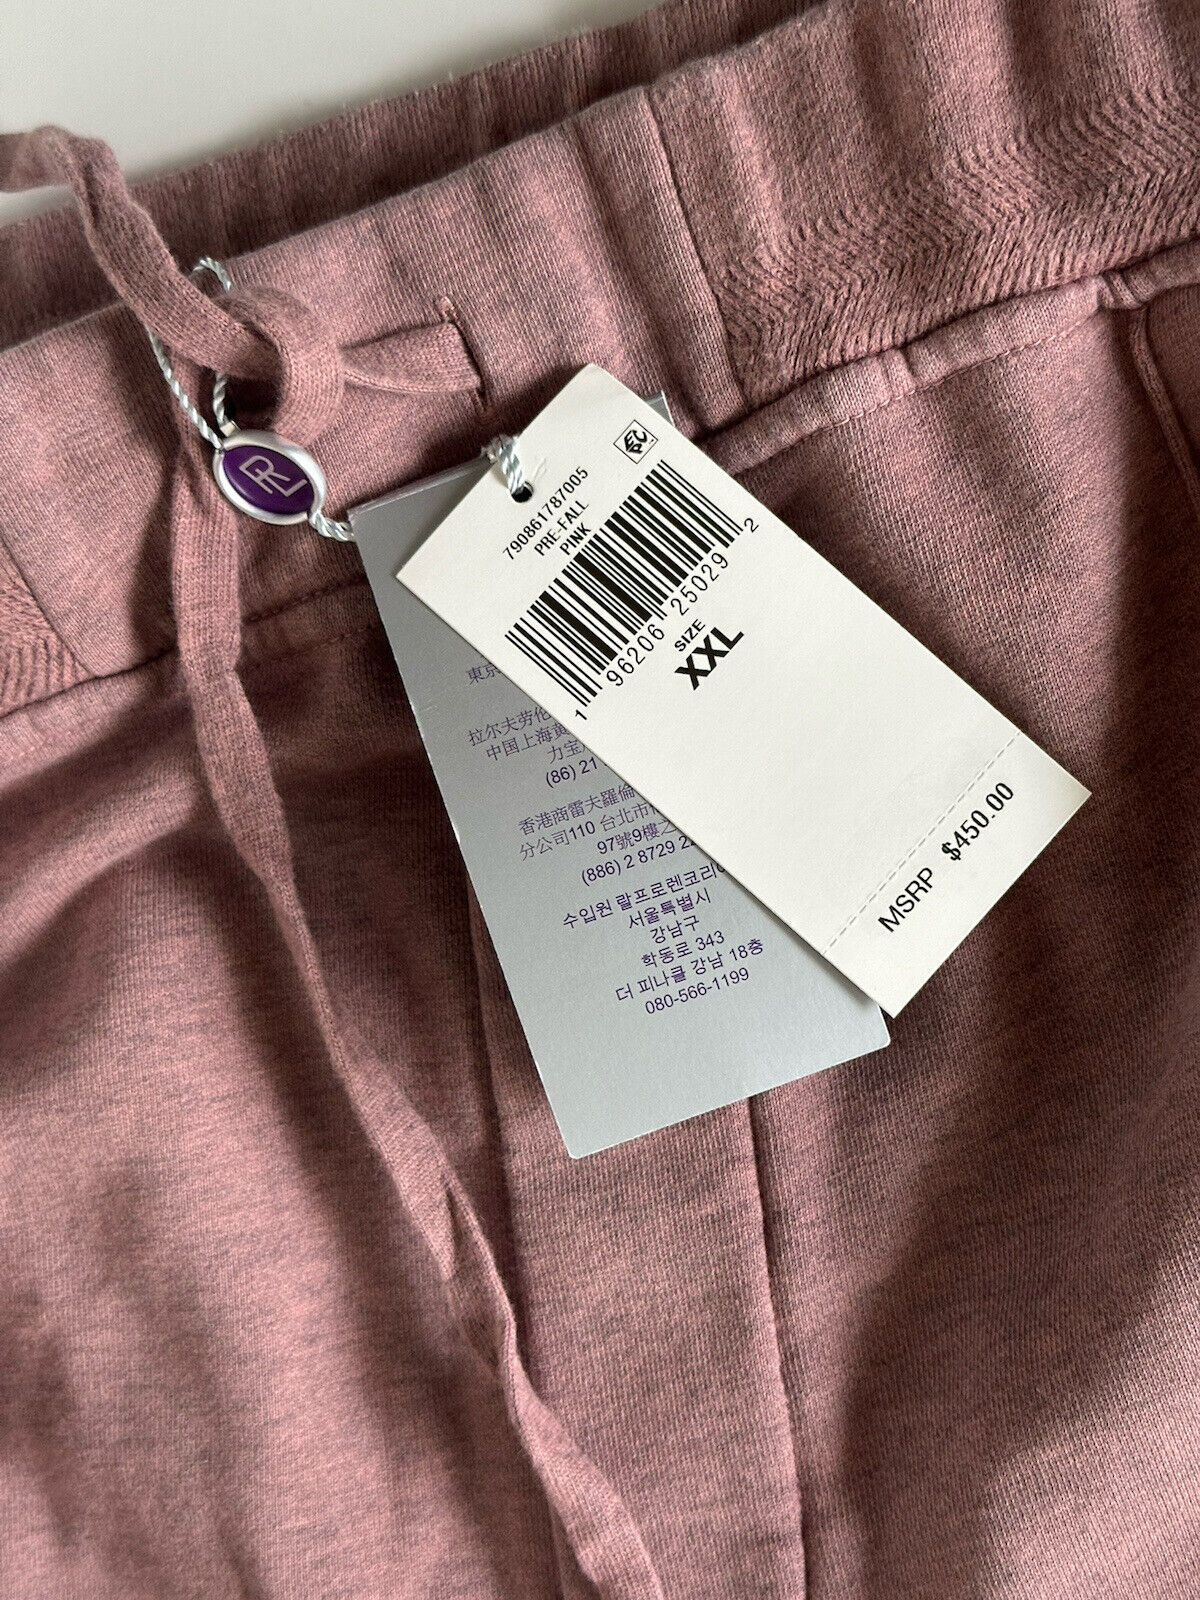 NWT $450 Ralph Lauren Purple Label Casual Pink Pants 2XL Made in Italy